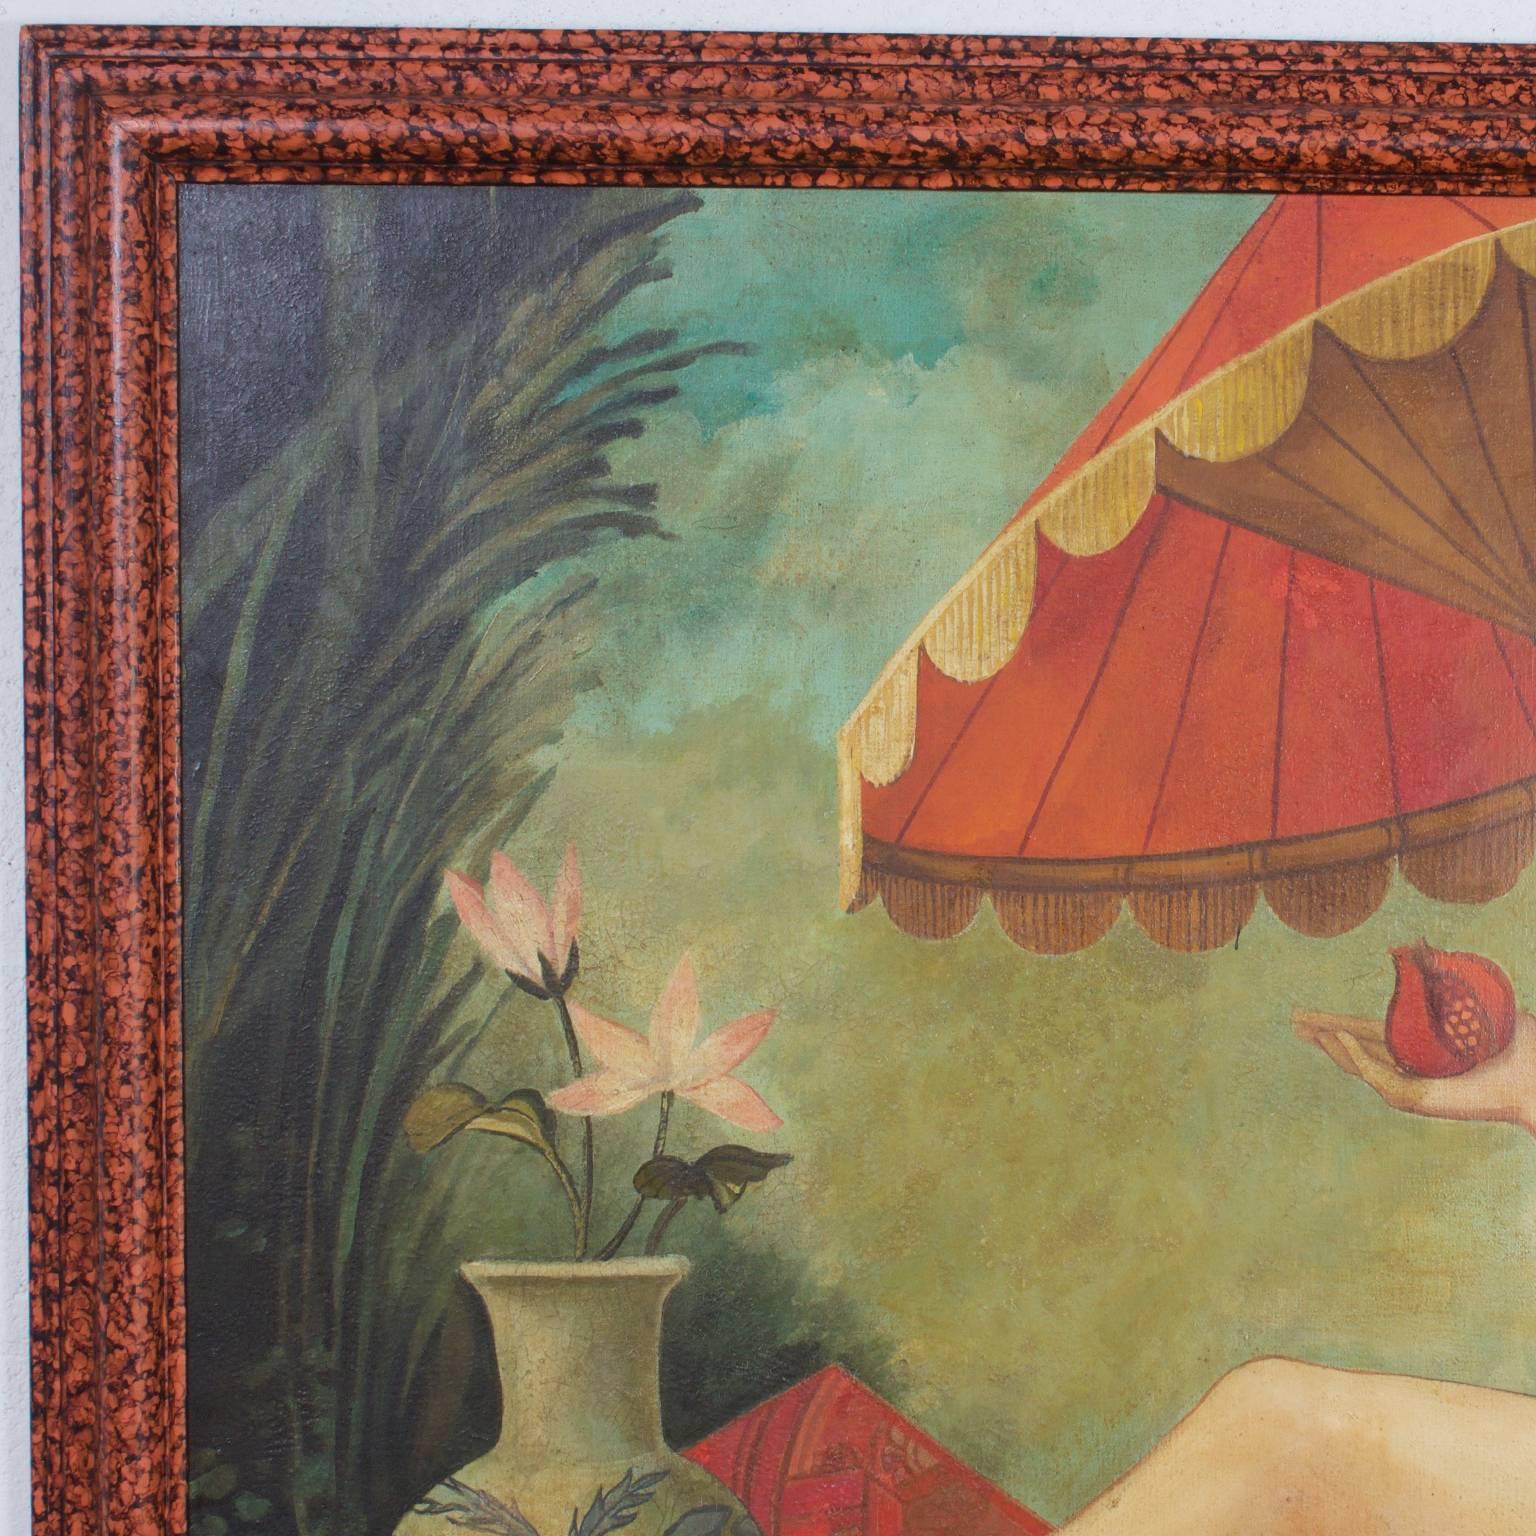 Folk Art Large Oil on Canvas Painting Titled L'asie by William Skilling